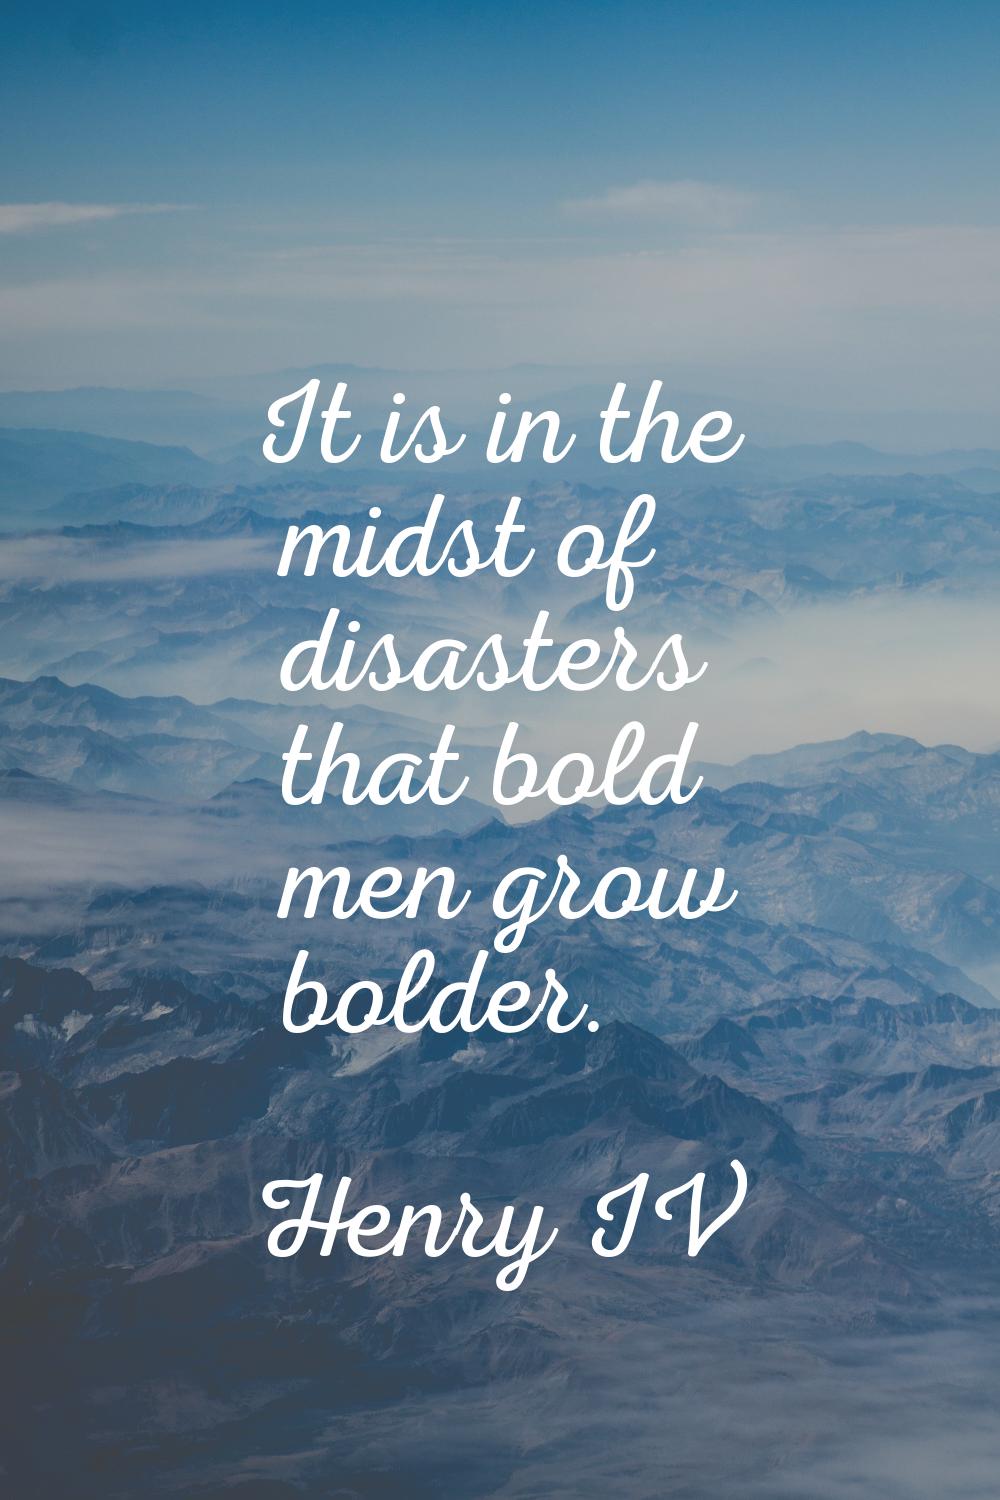 It is in the midst of disasters that bold men grow bolder.